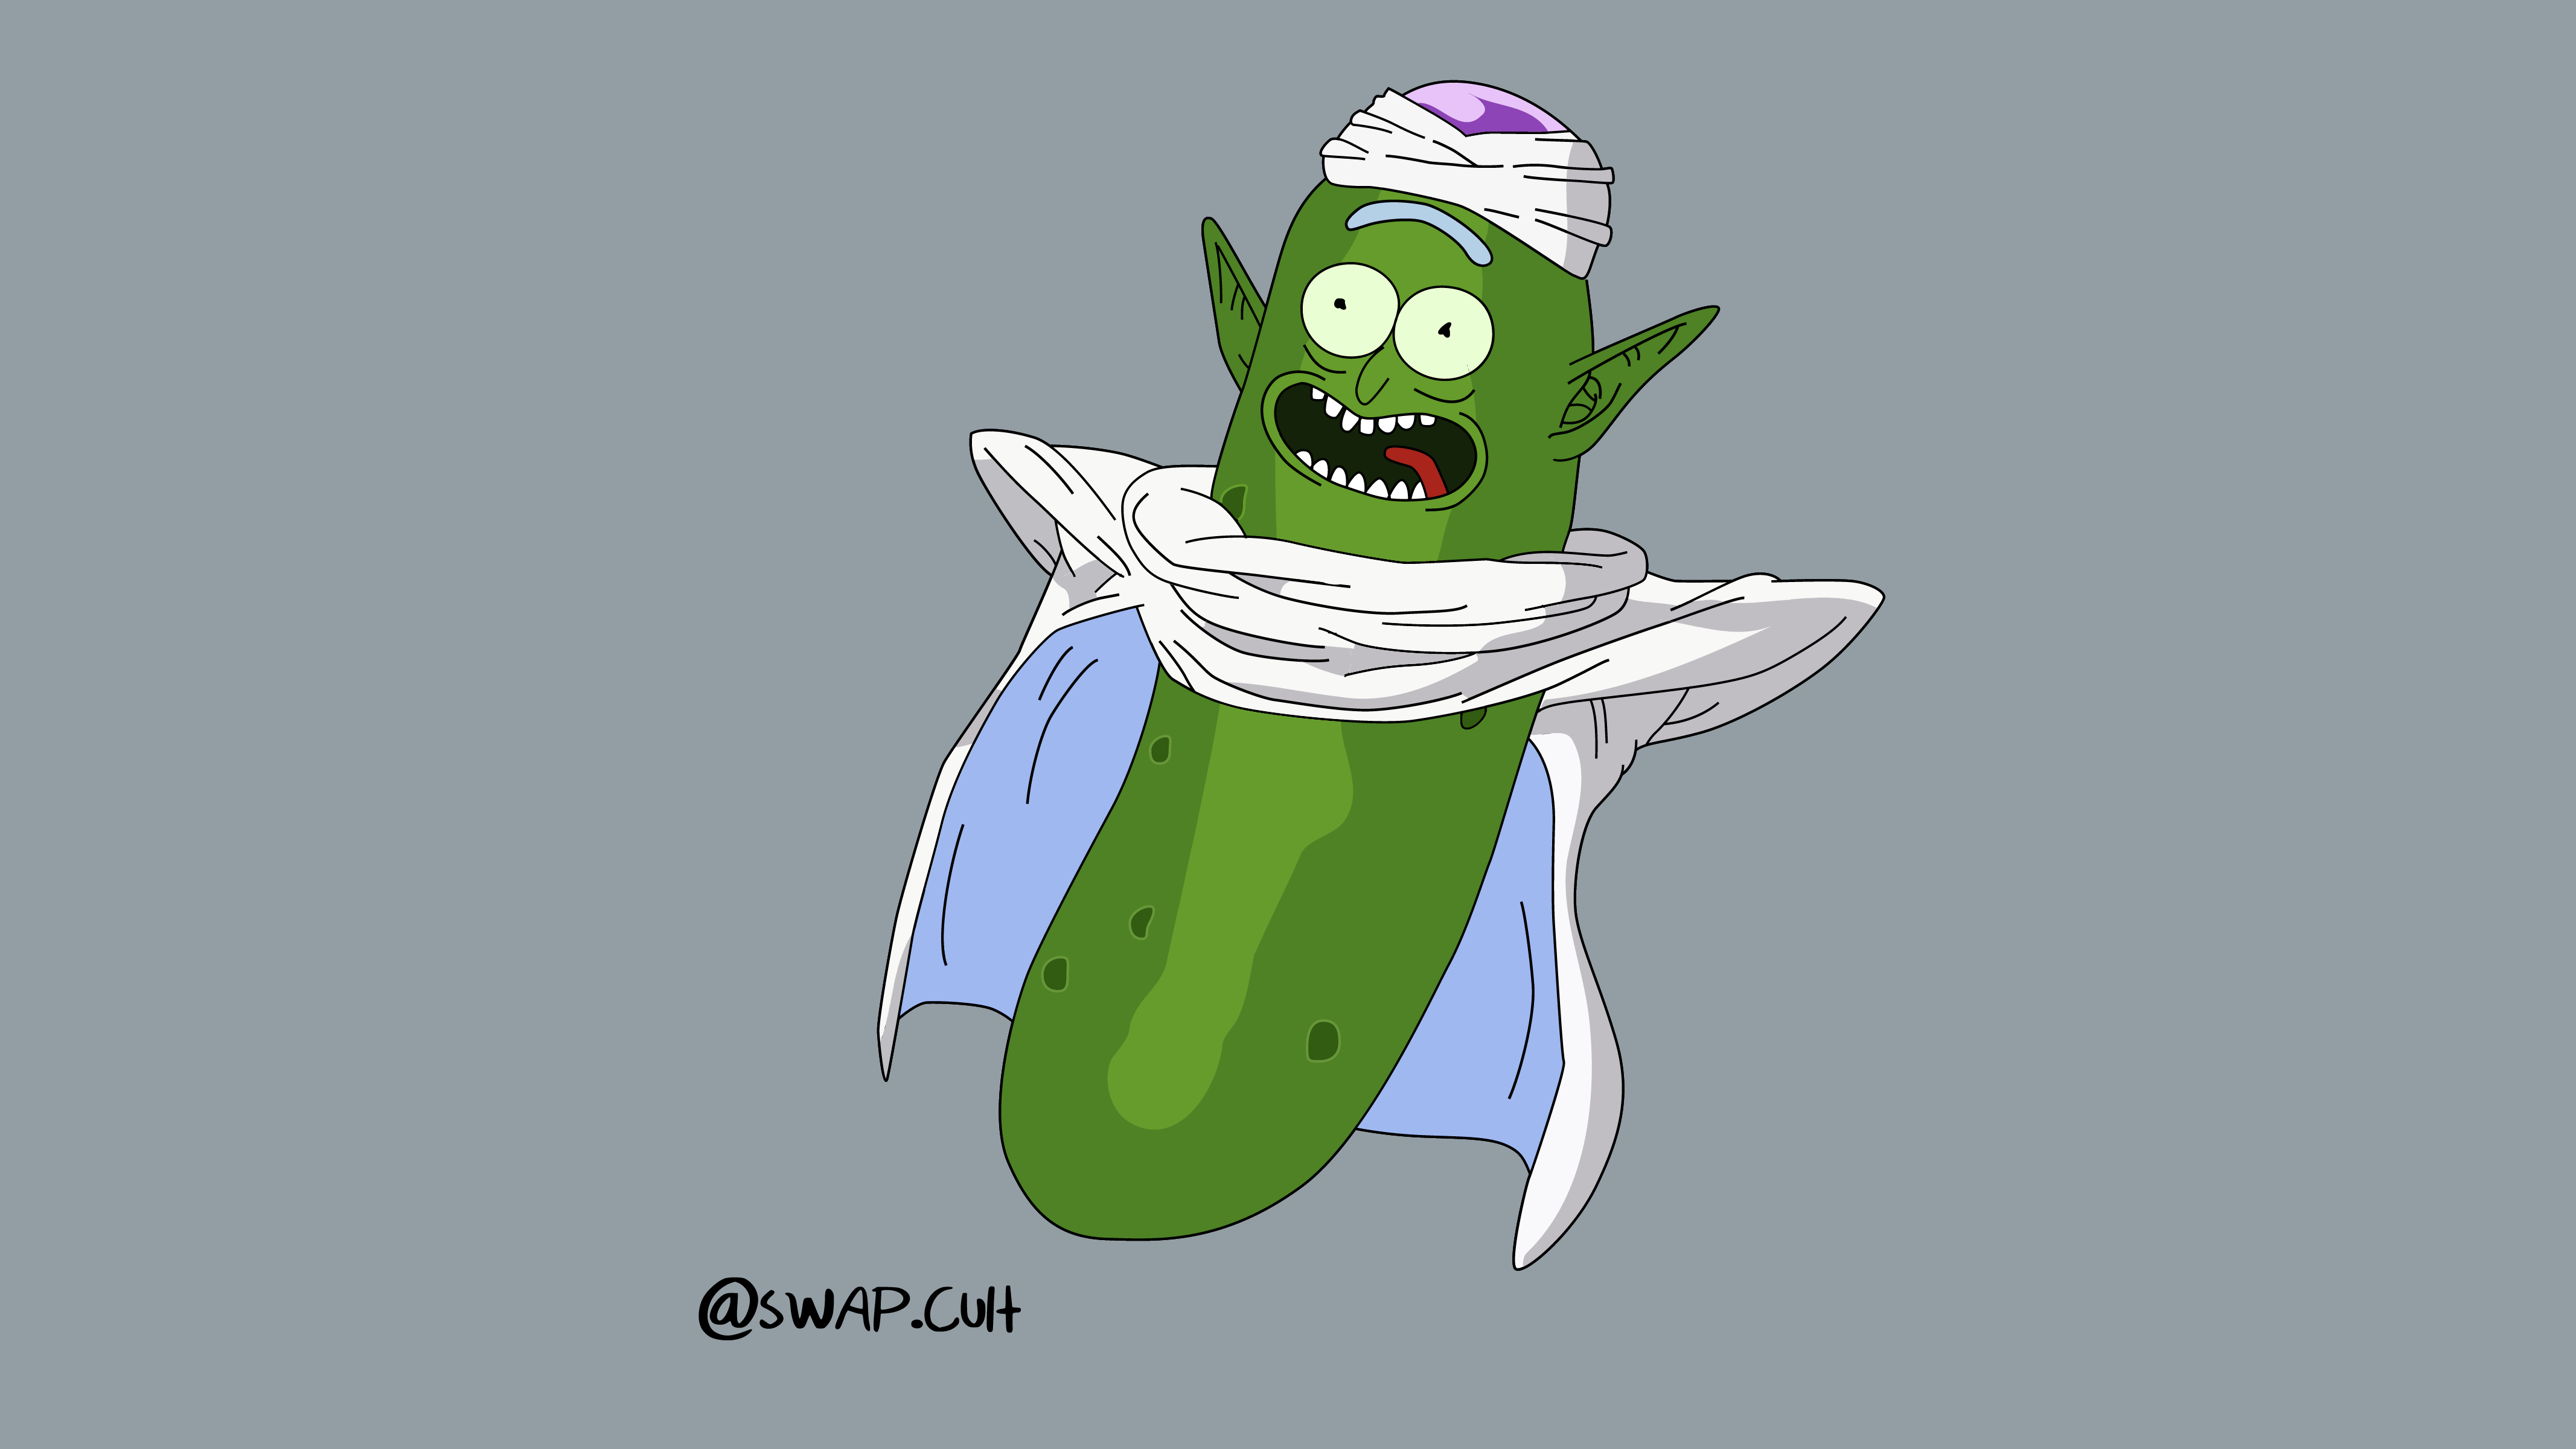 General 4267x2400 Rick and Morty Piccolo Dragon Ball Z Rick Sanchez humor TV series cartoon digital art watermarked simple background